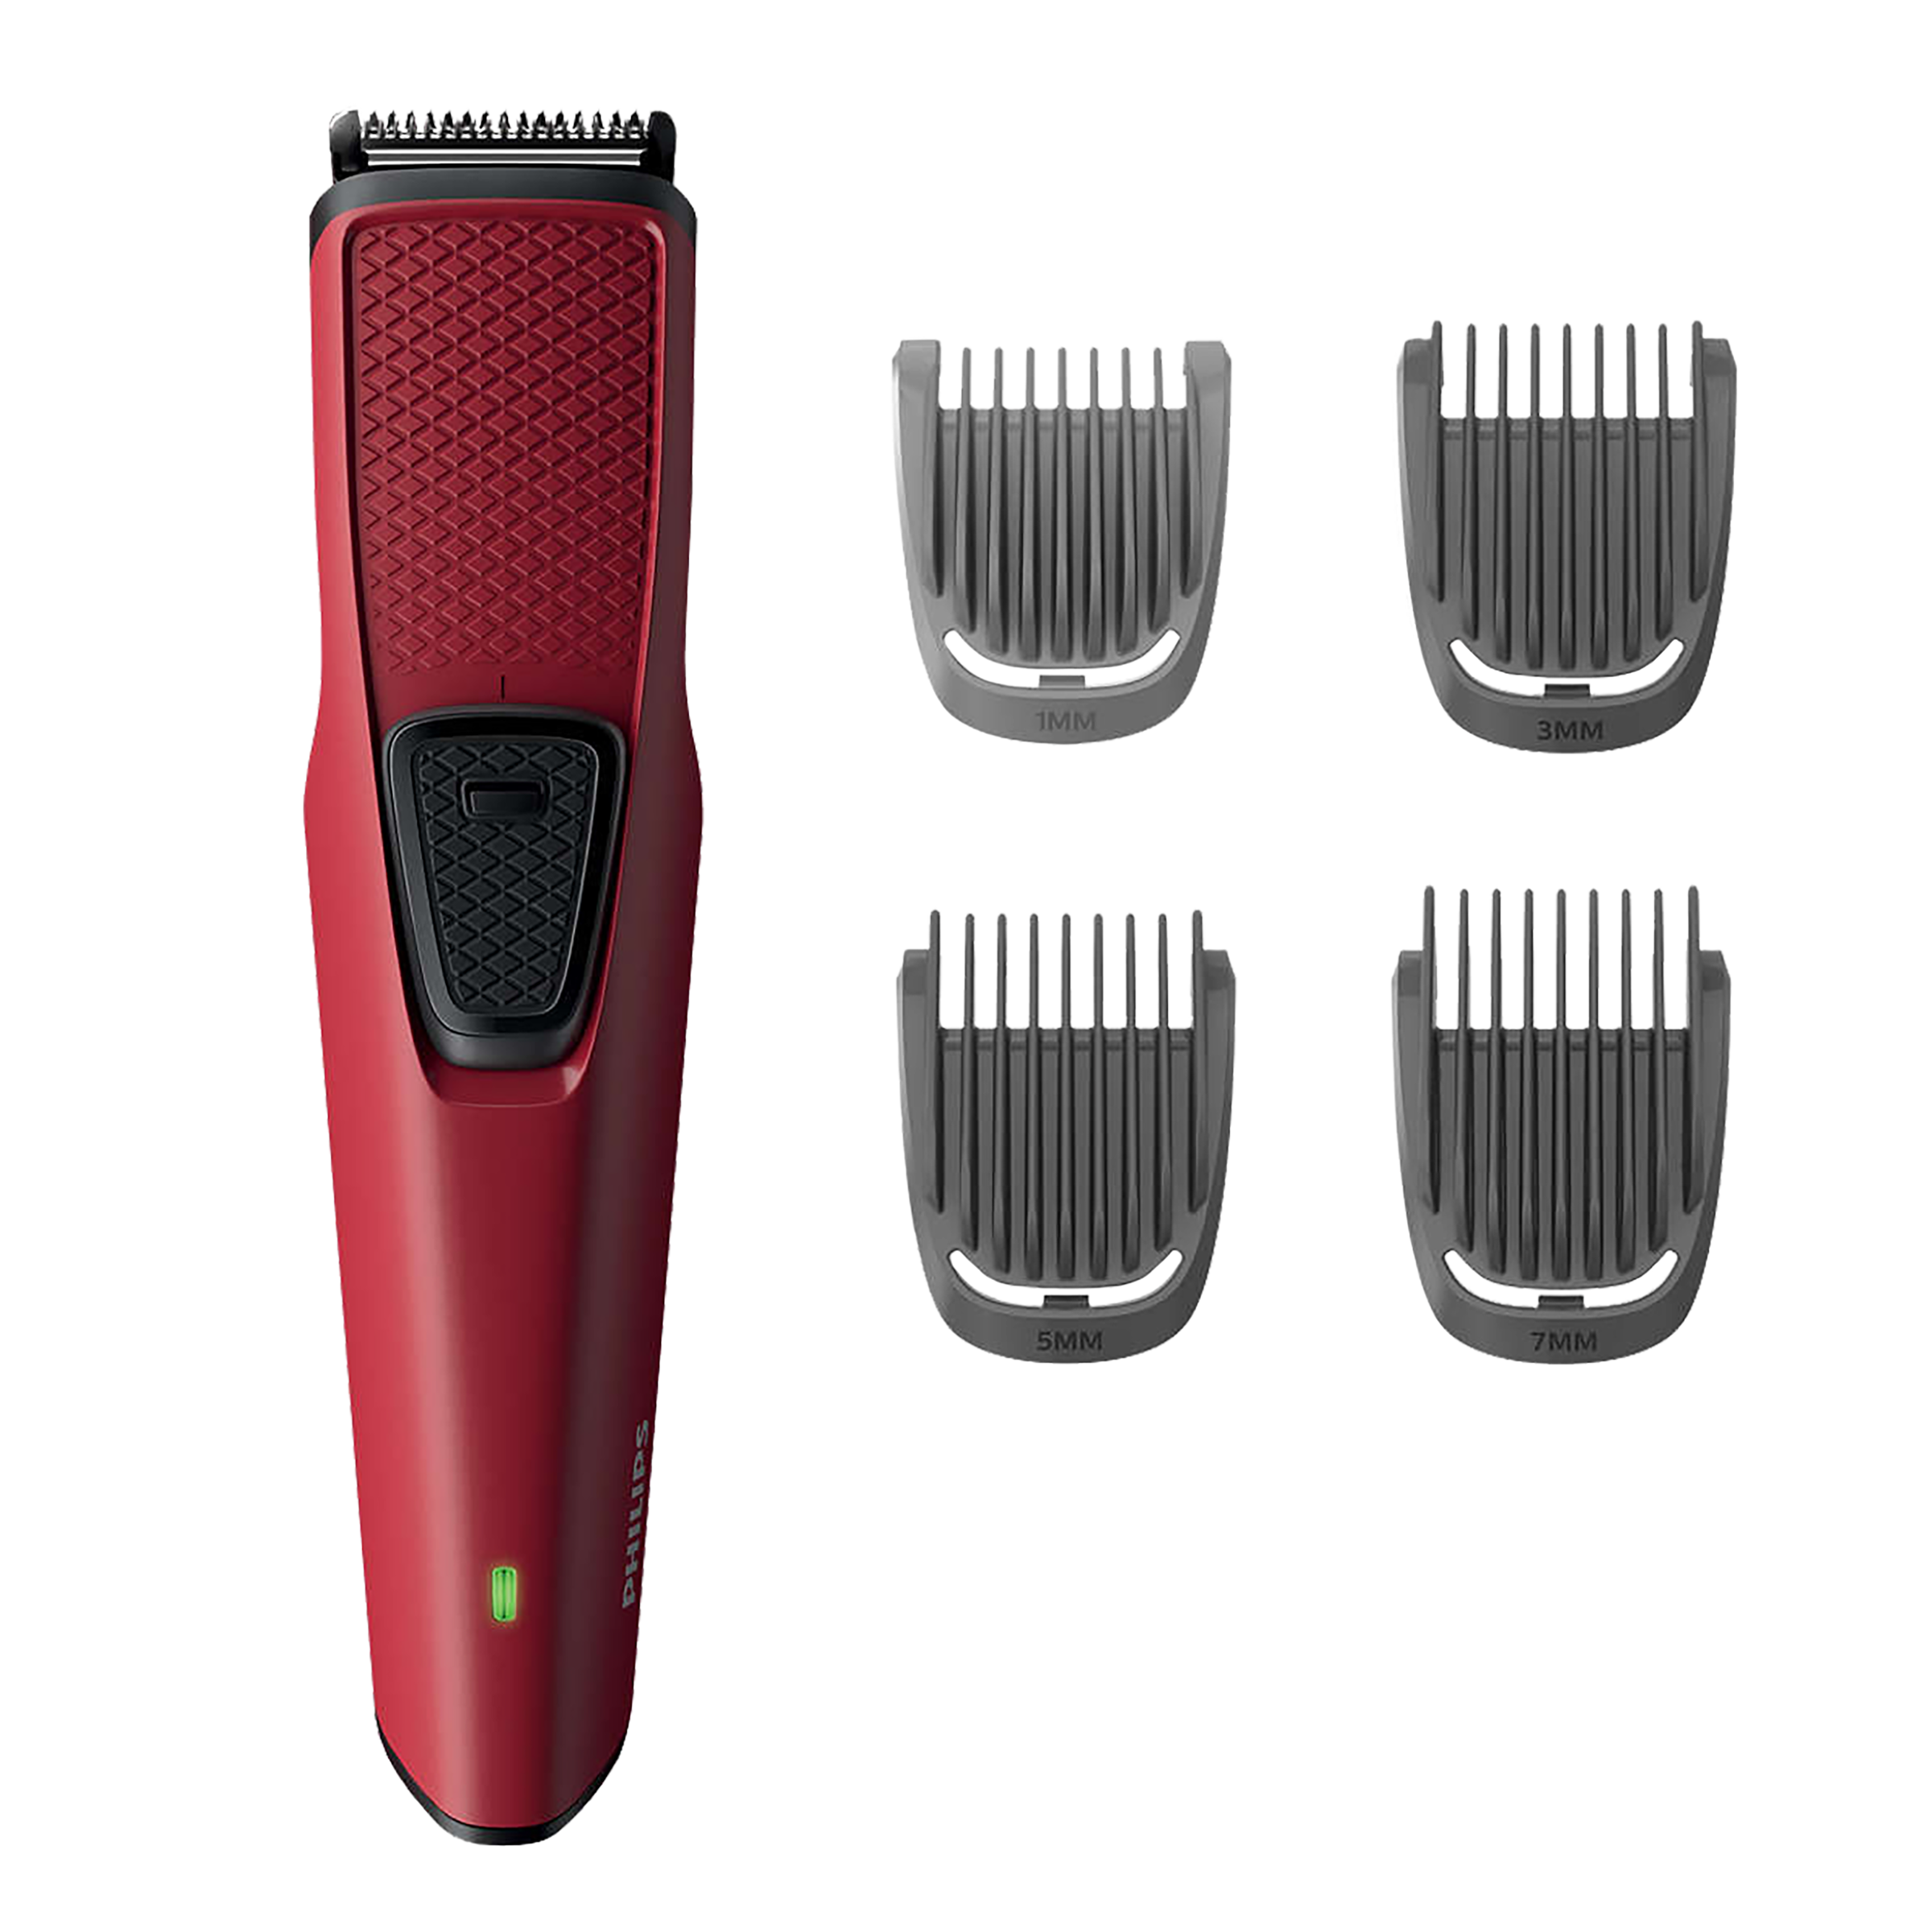 Philips BT1235/15 Stainless Steel Blades Cordless Trimmer (USB Charging, 885123515280, Maroon)